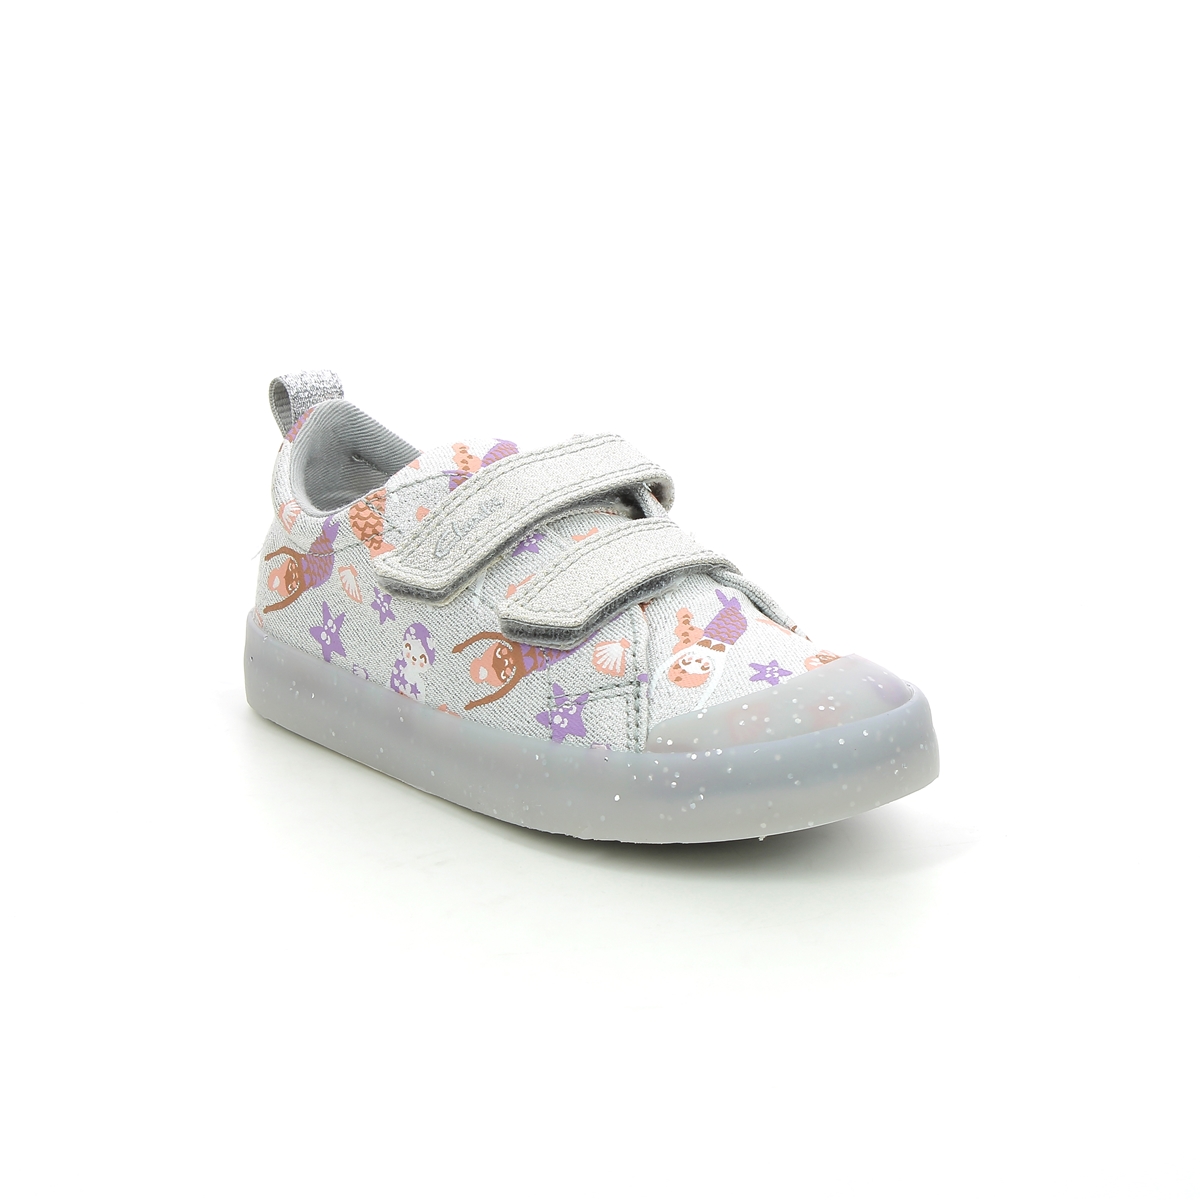 Clarks Foxing T Fit Silver girls trainers